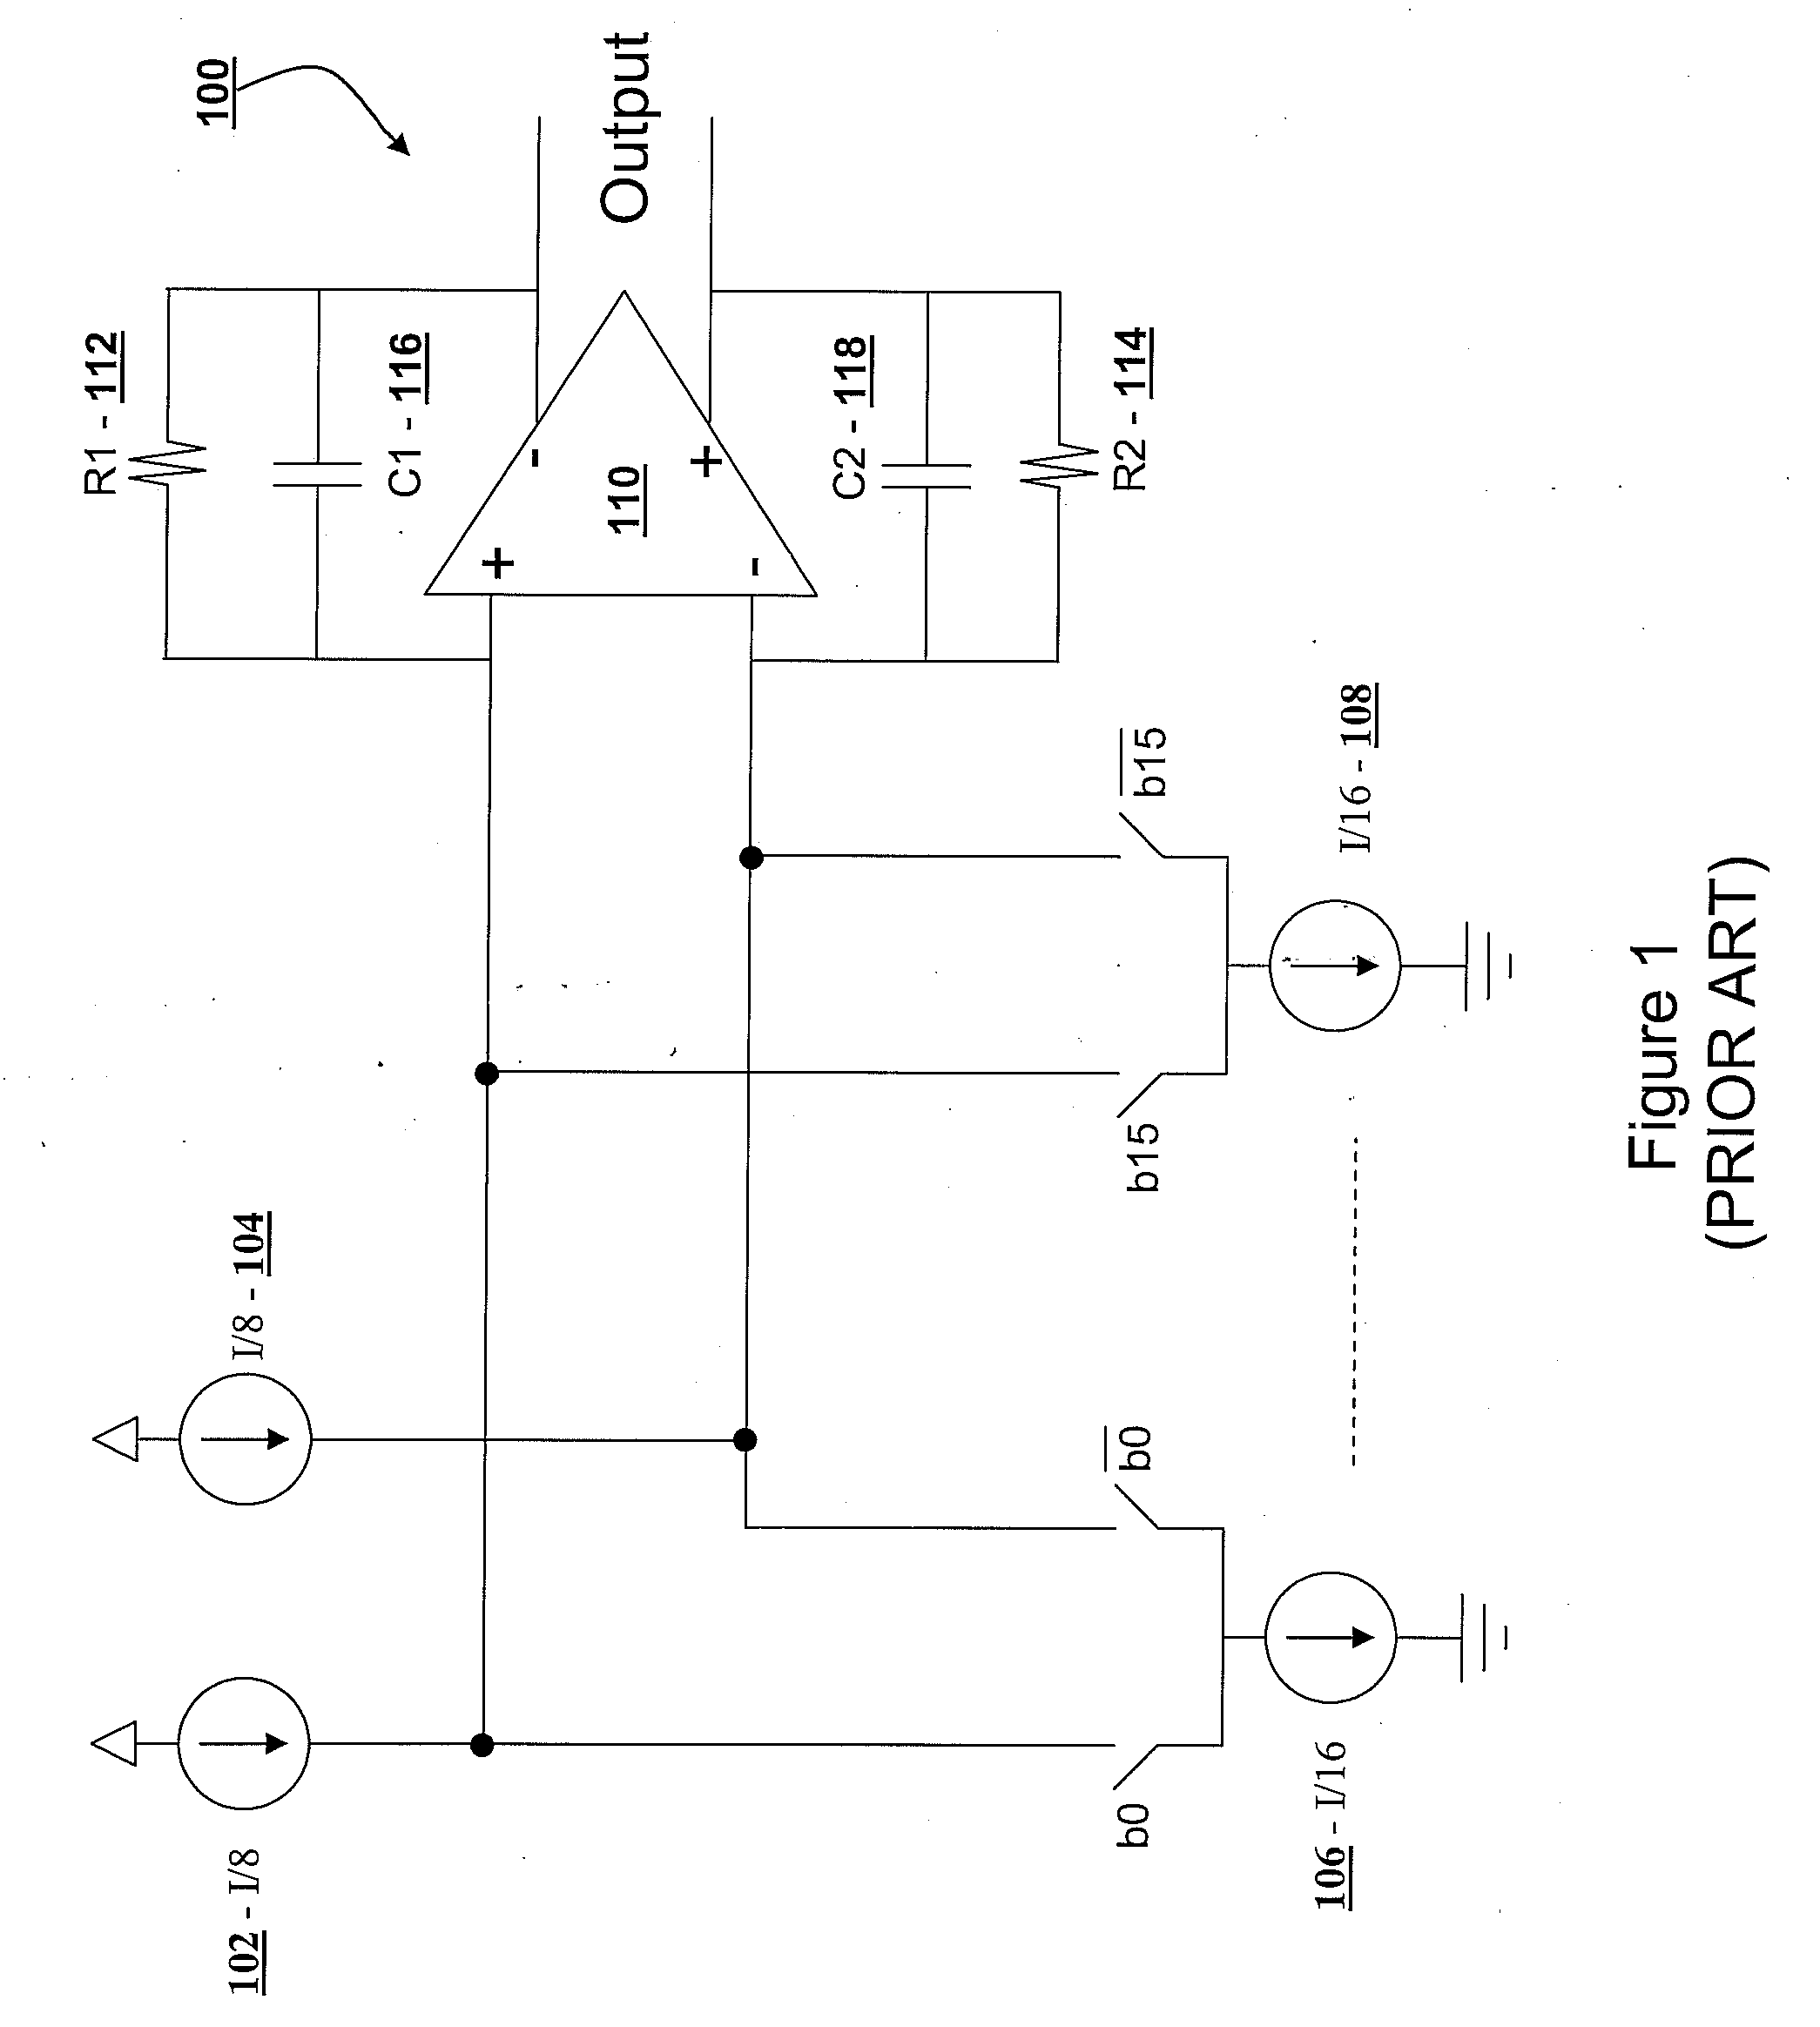 Return-to-hold switching scheme for dac output stage